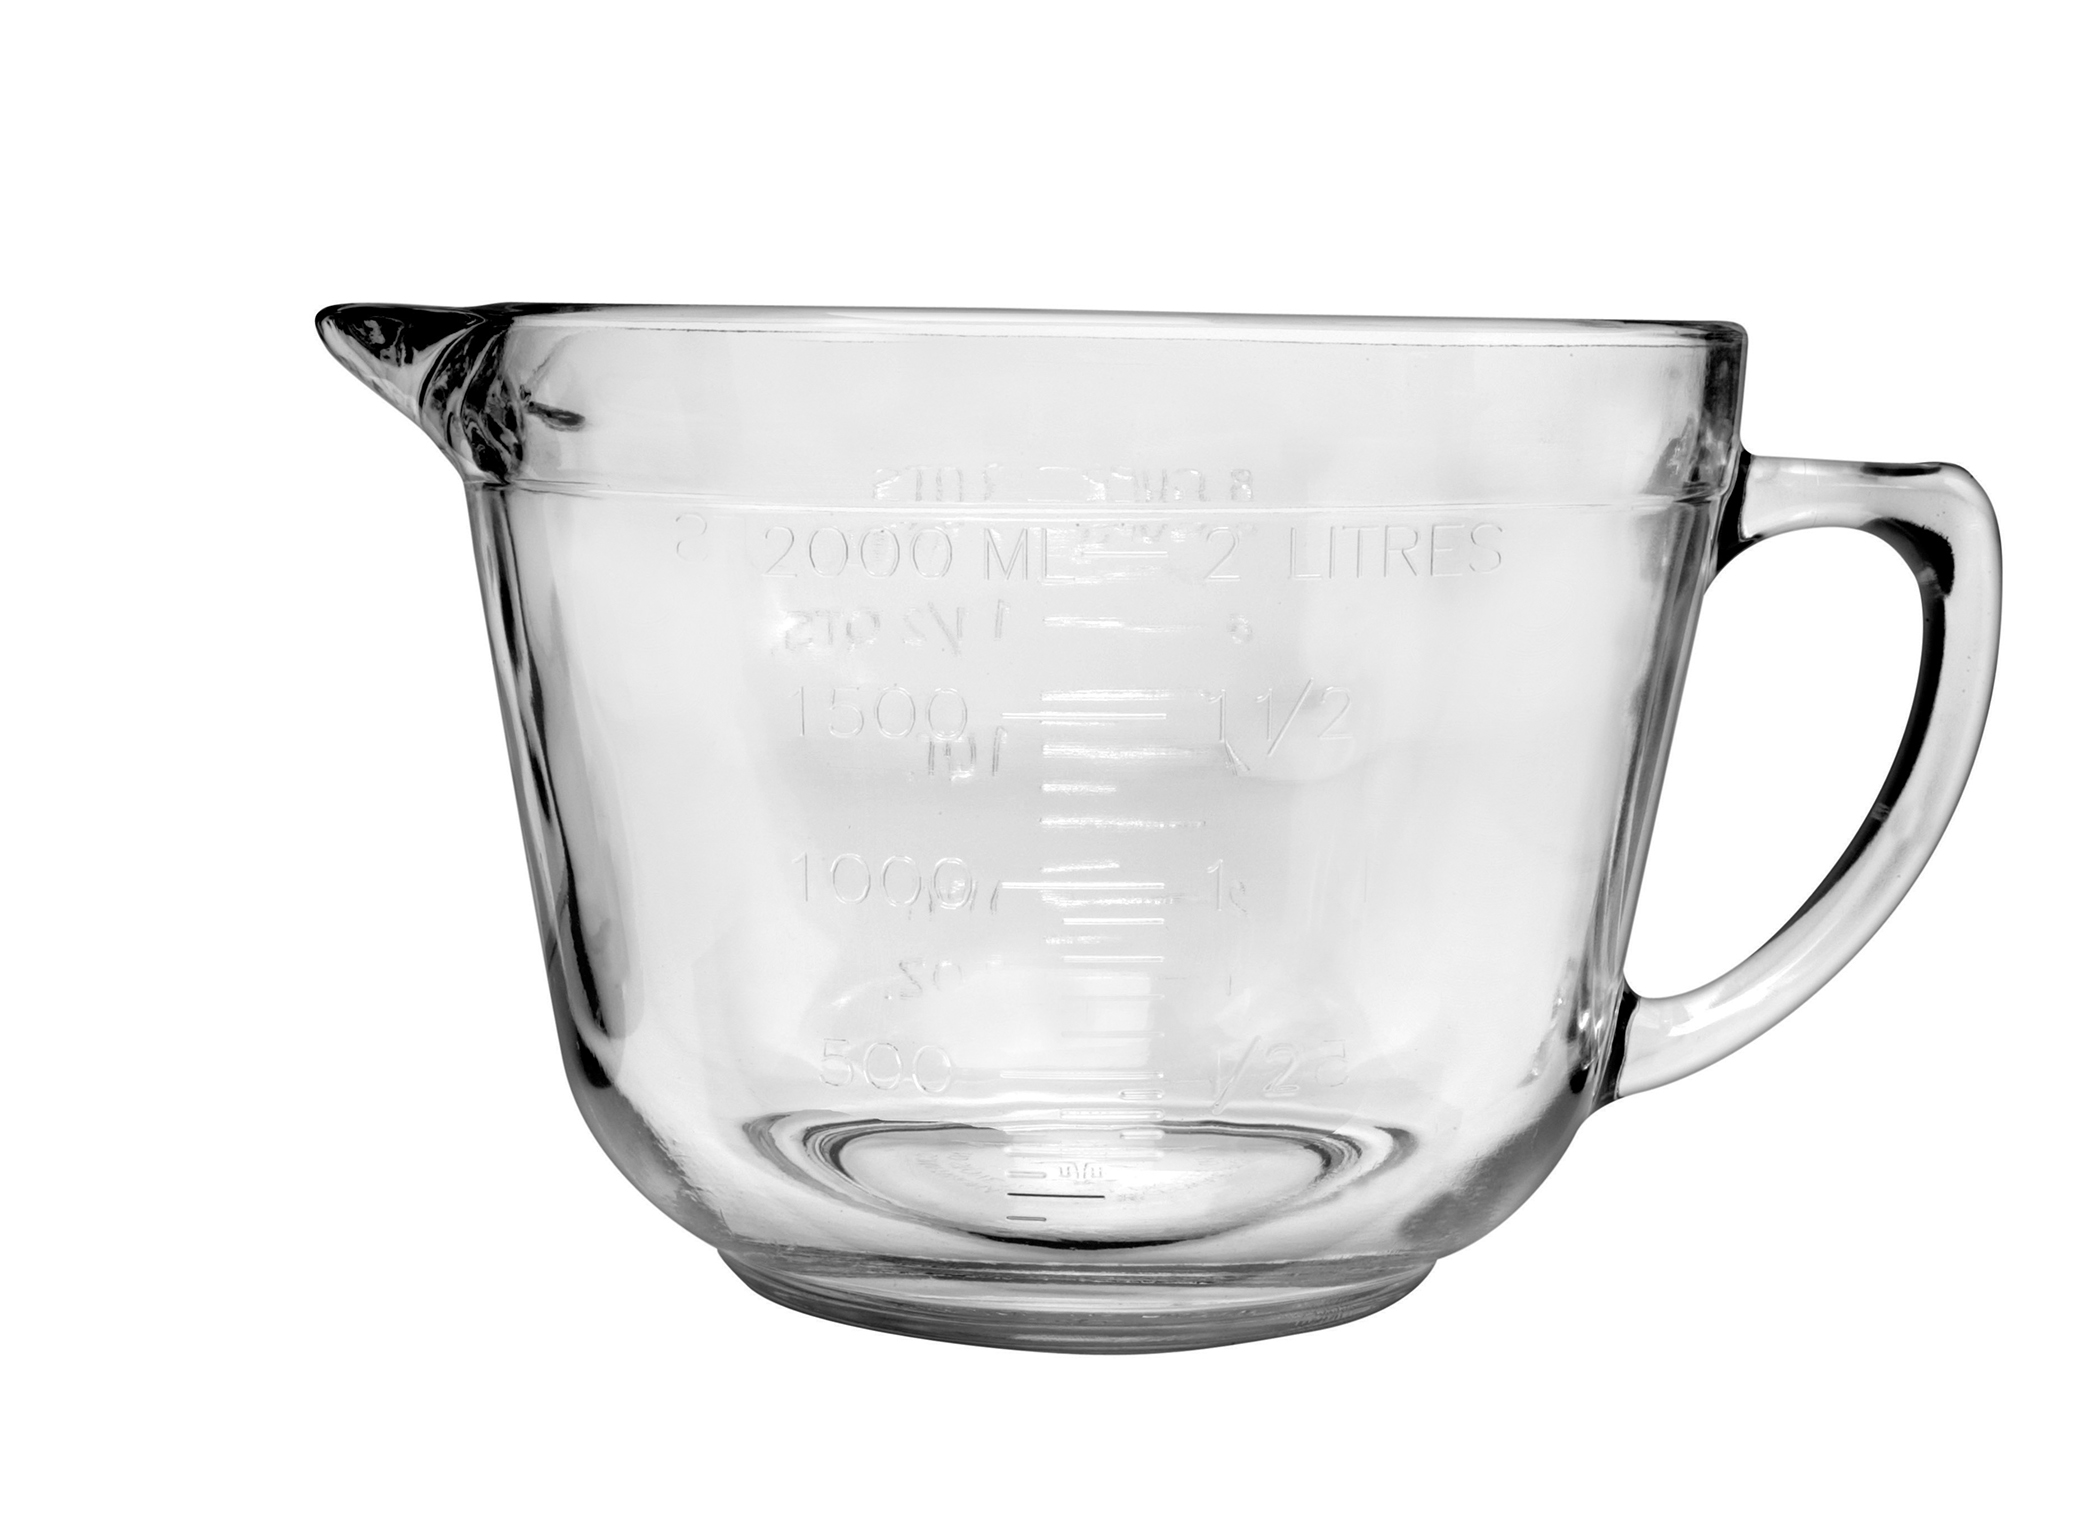 Anchor Hocking Essentials 8 Cup Clear Glass Measuring Batter Bowl